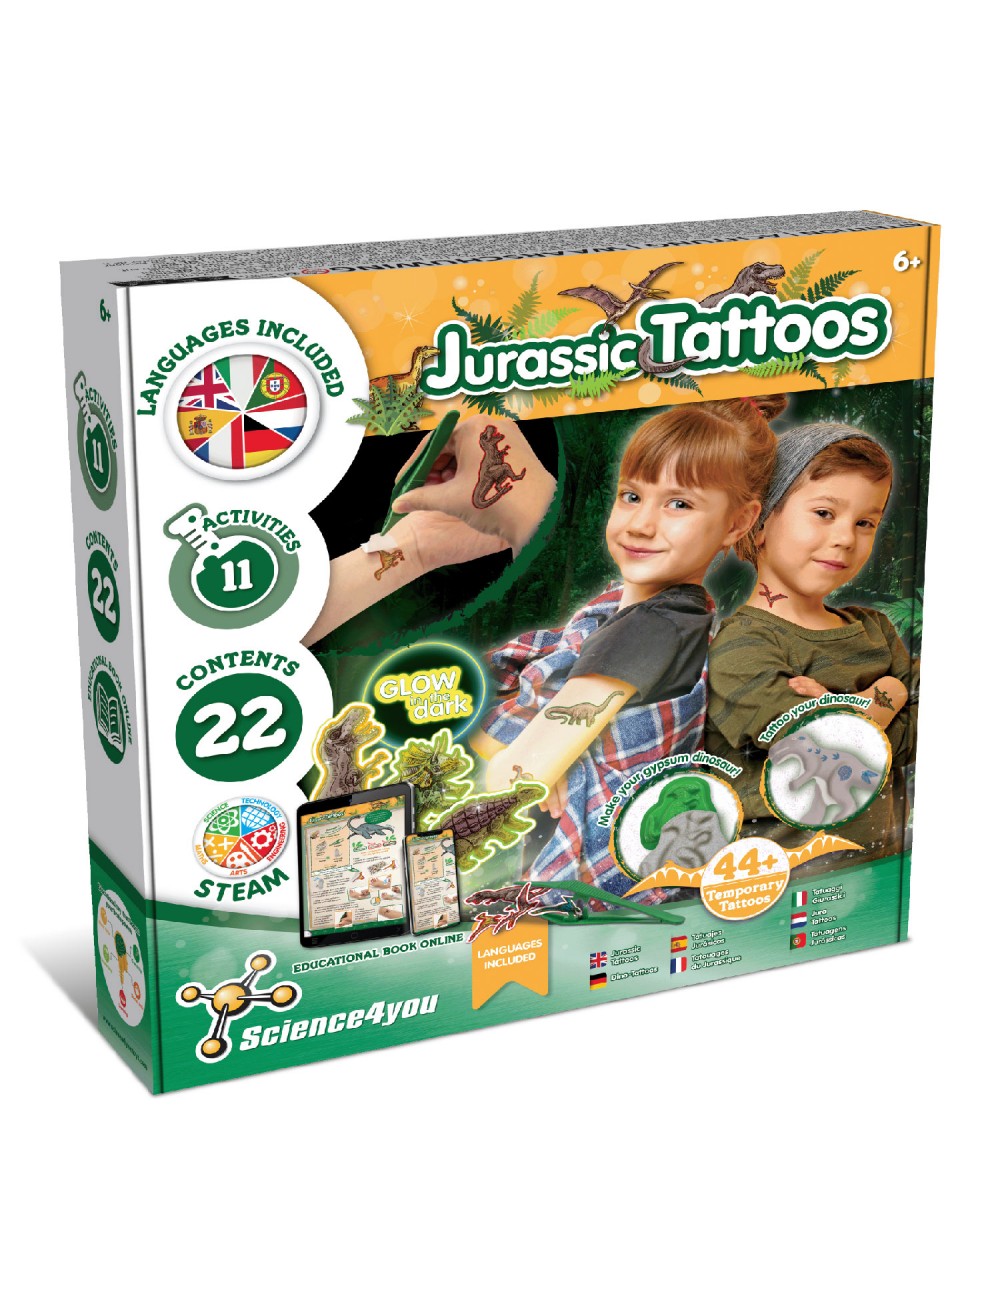 Temporary Glitter Tattoo Kit For Kids -, Dinosaur Butterfly Fake Tattoo  Make Up Art Kits For Boys and Girls, DIY Creative Waterproof Tattoos with  90sheets Tat Stickers 24 Glitter Box and 3